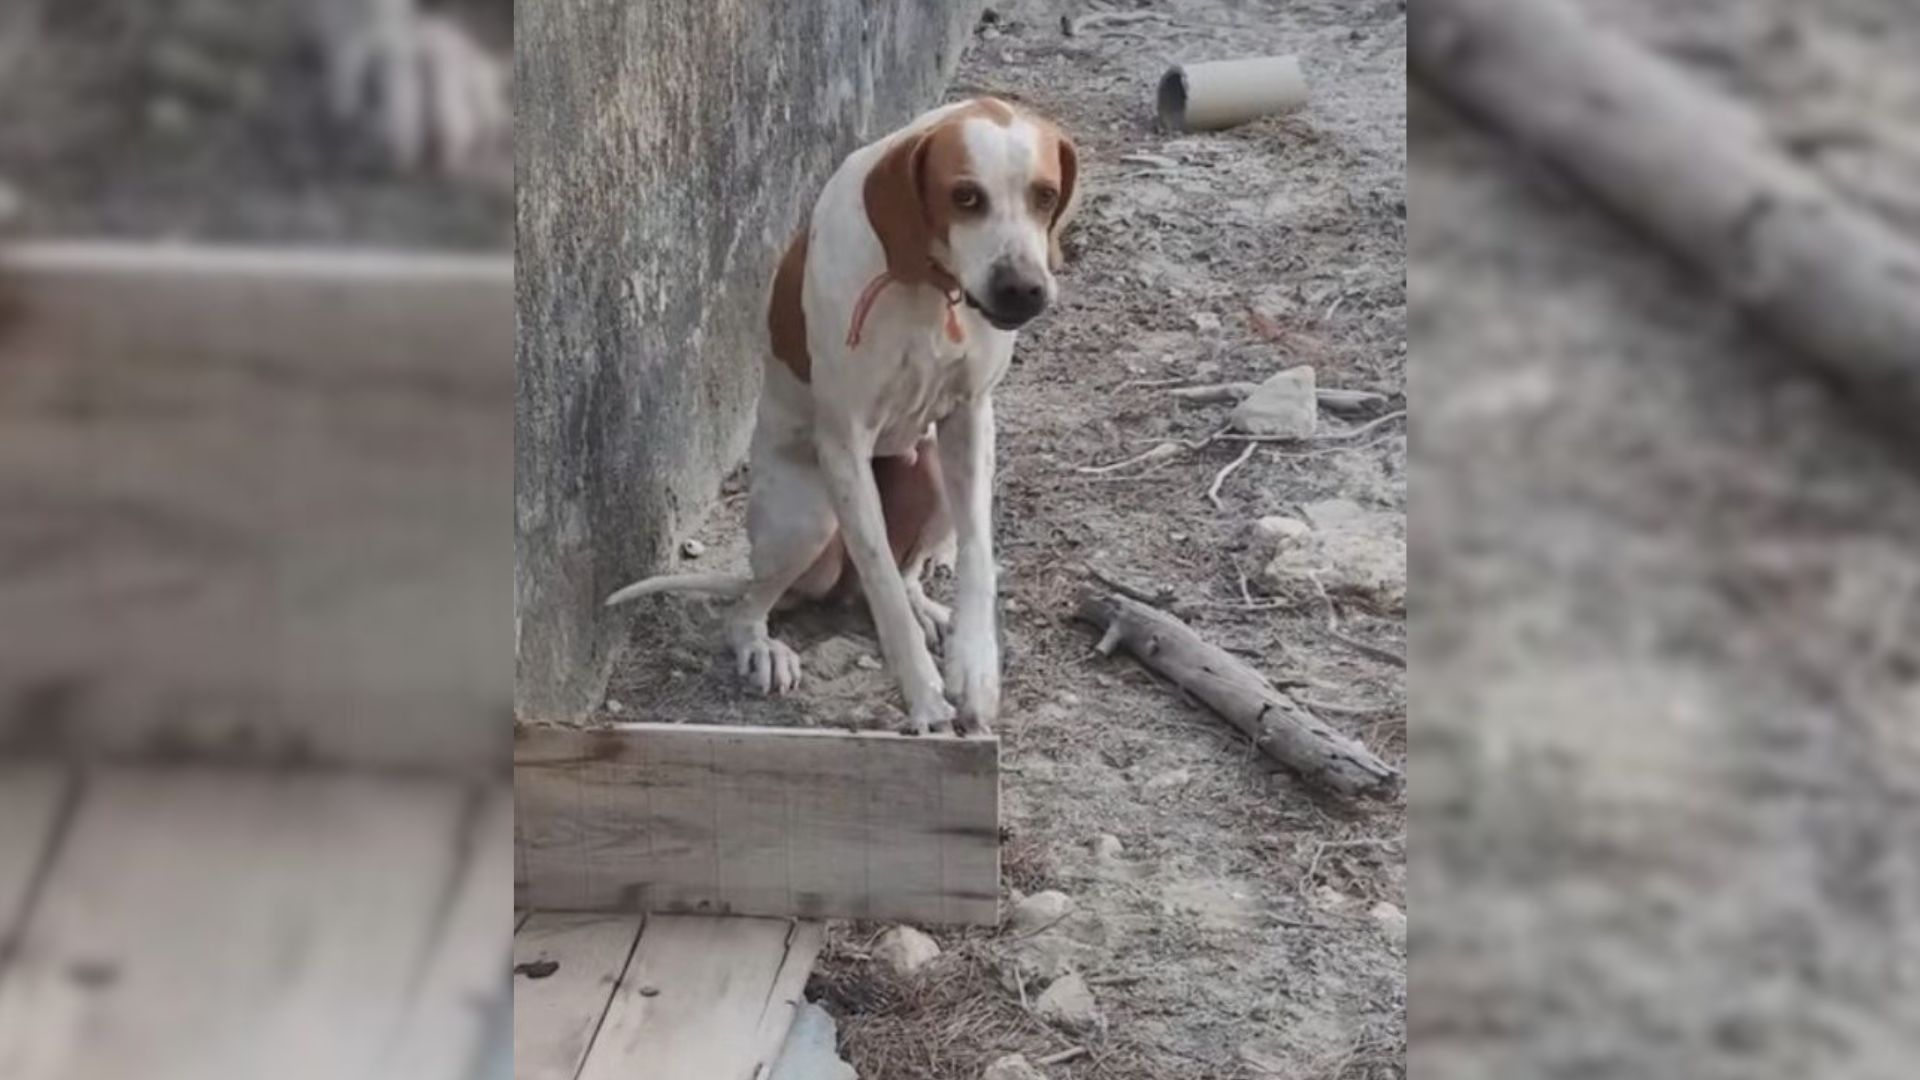 Poor Dog Was Stuck In A Concrete Pit Until Somebody Finally Noticed And Came To Help